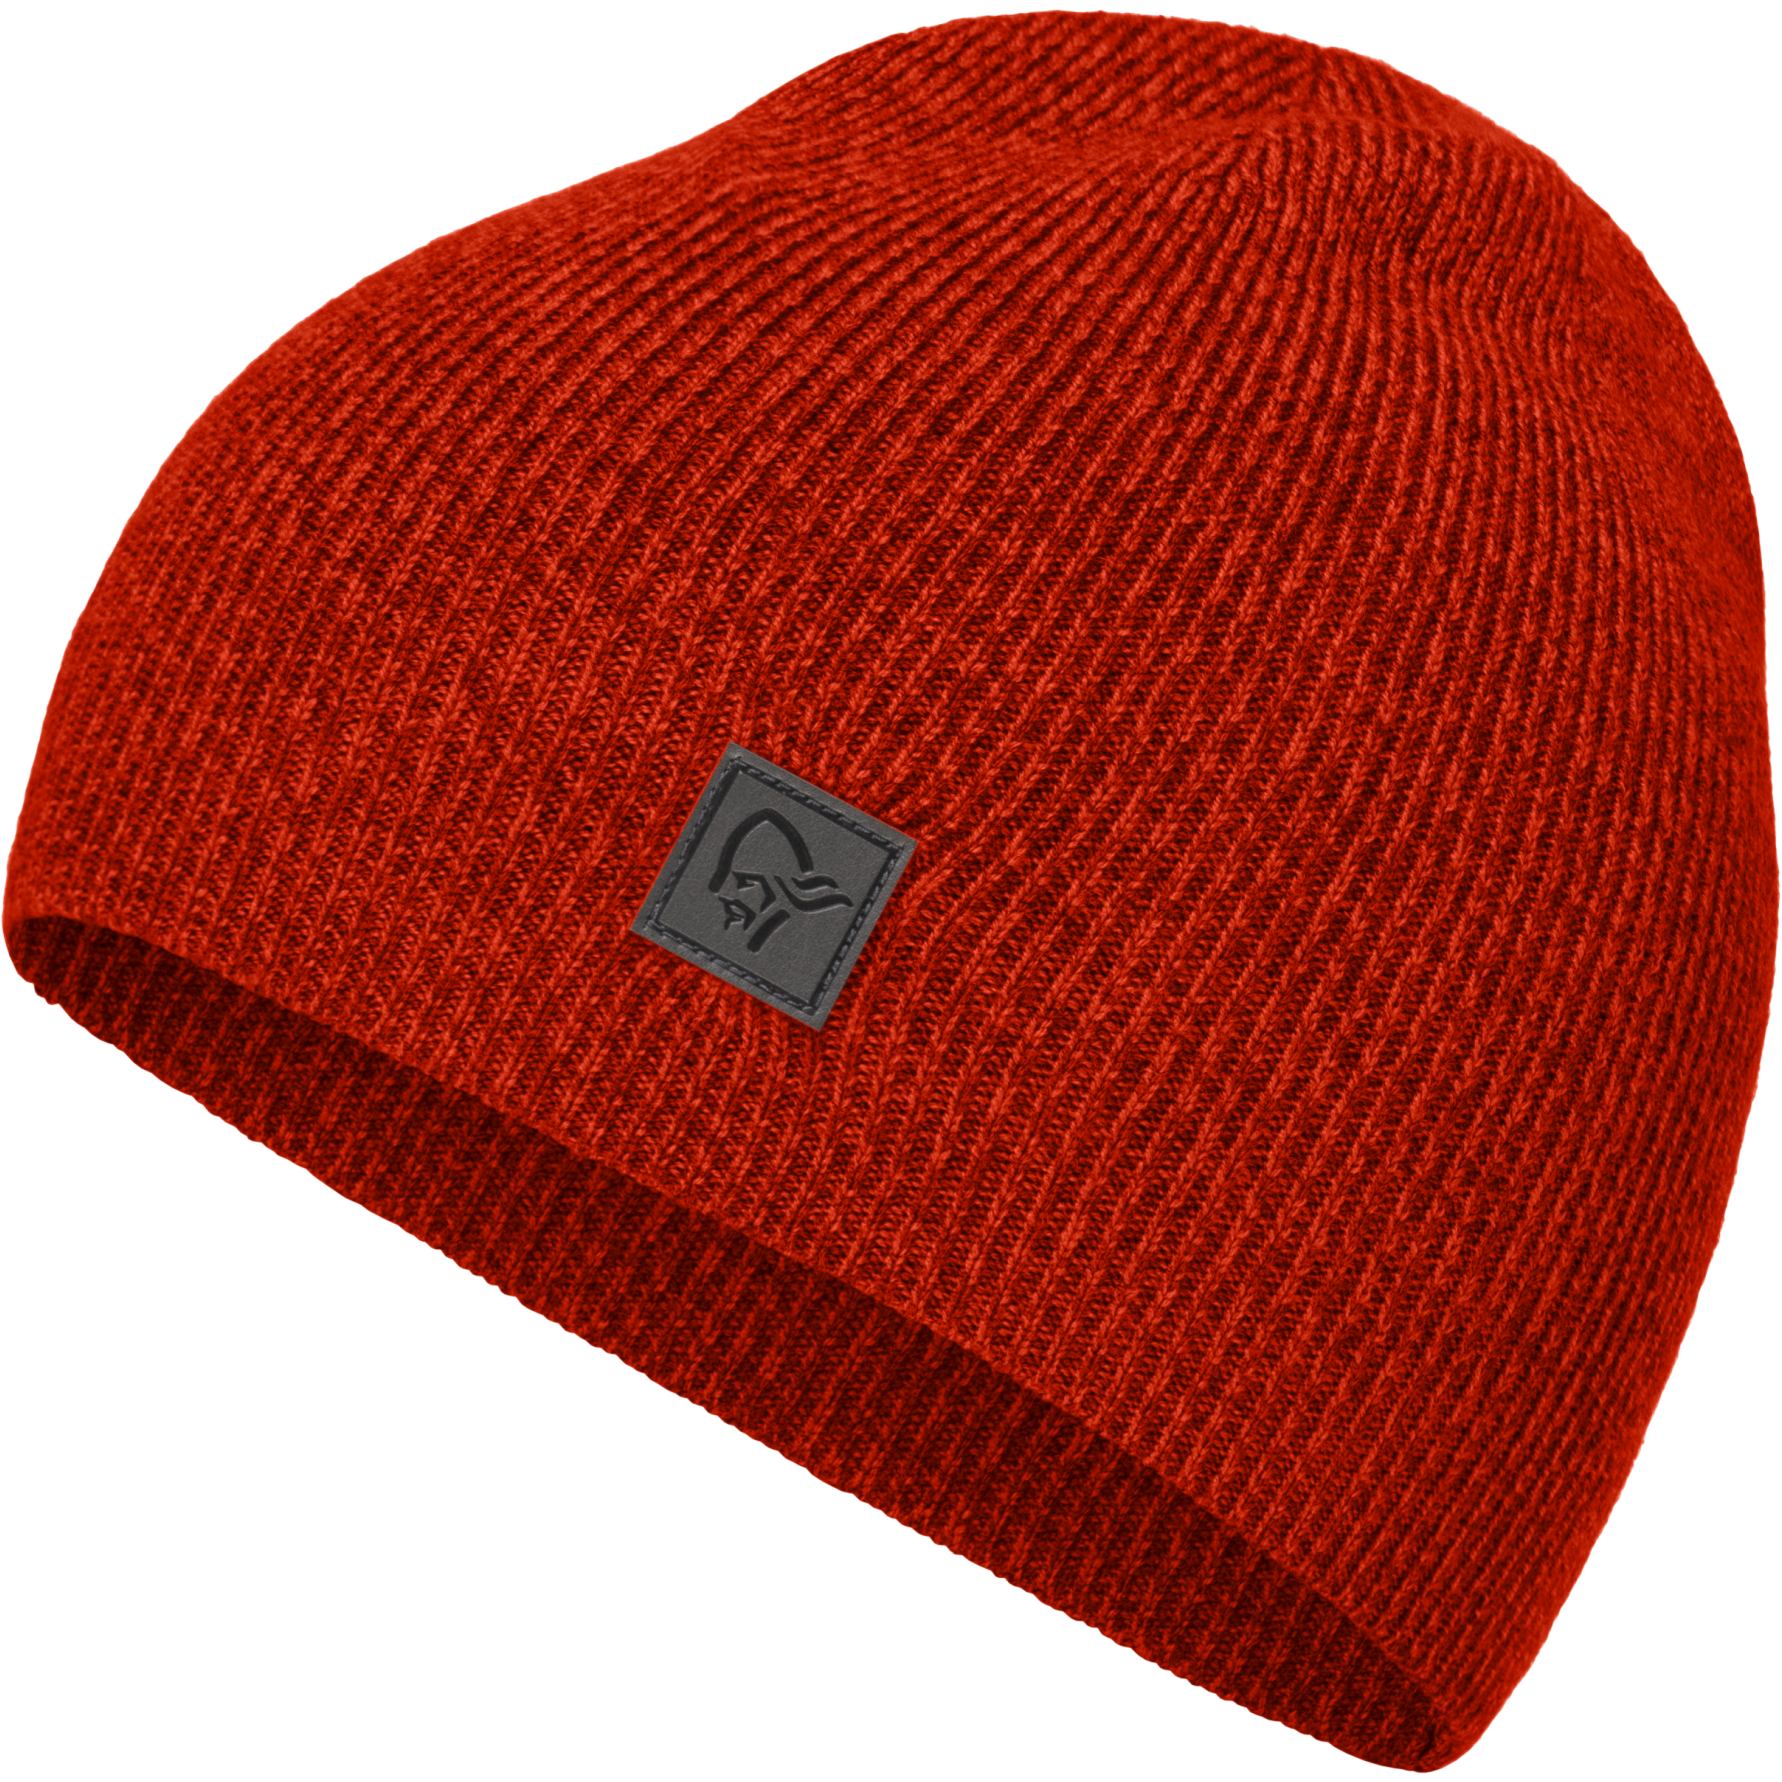 Picture of Norrona /29 thin marl knit Beanie - Arednalin